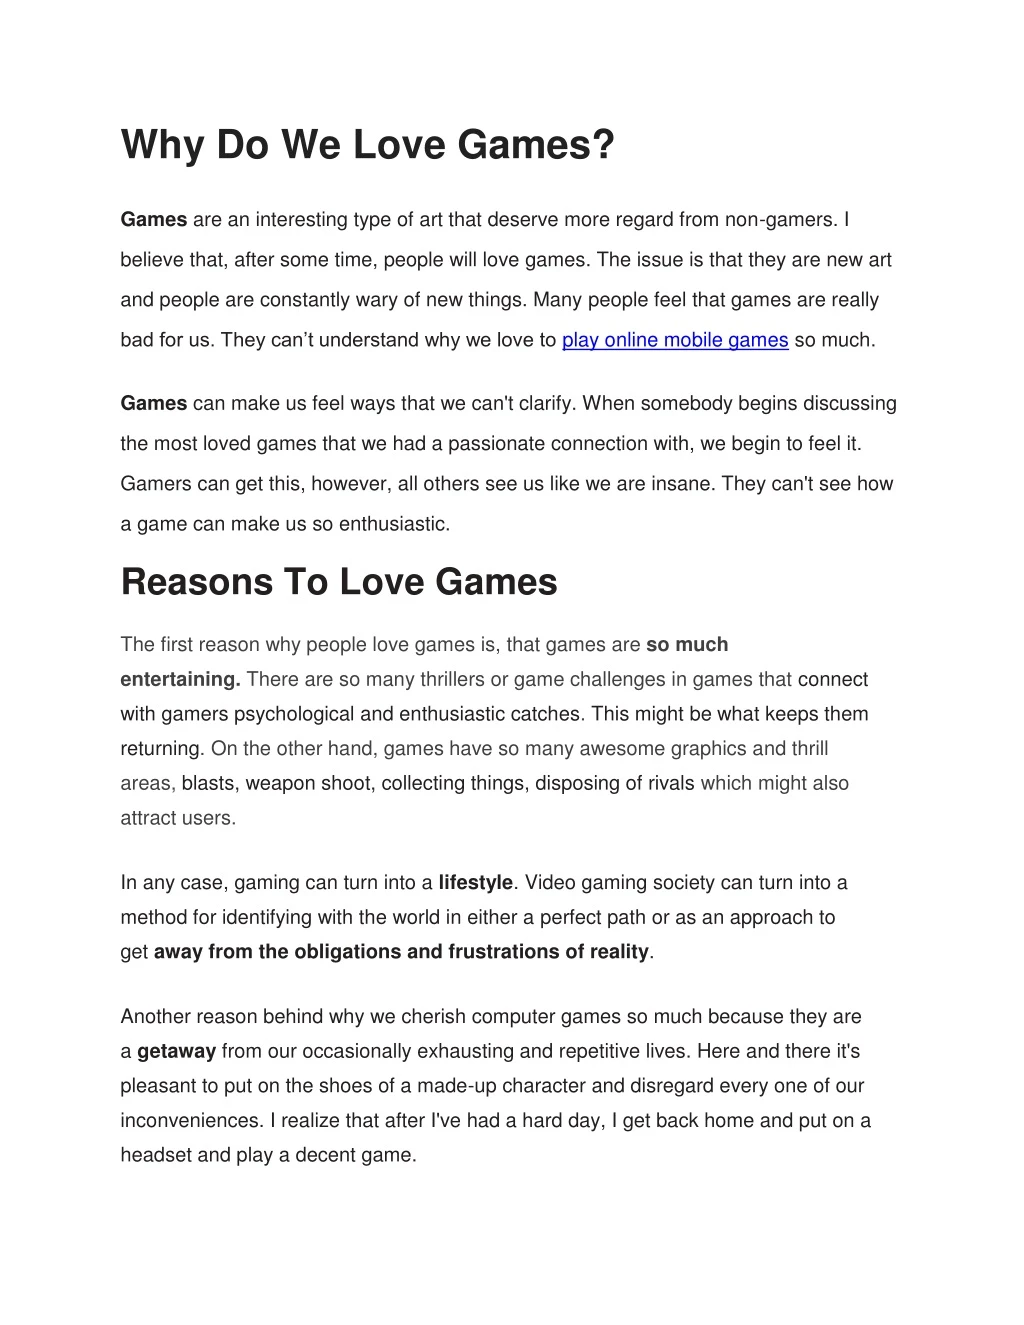 why do we love games